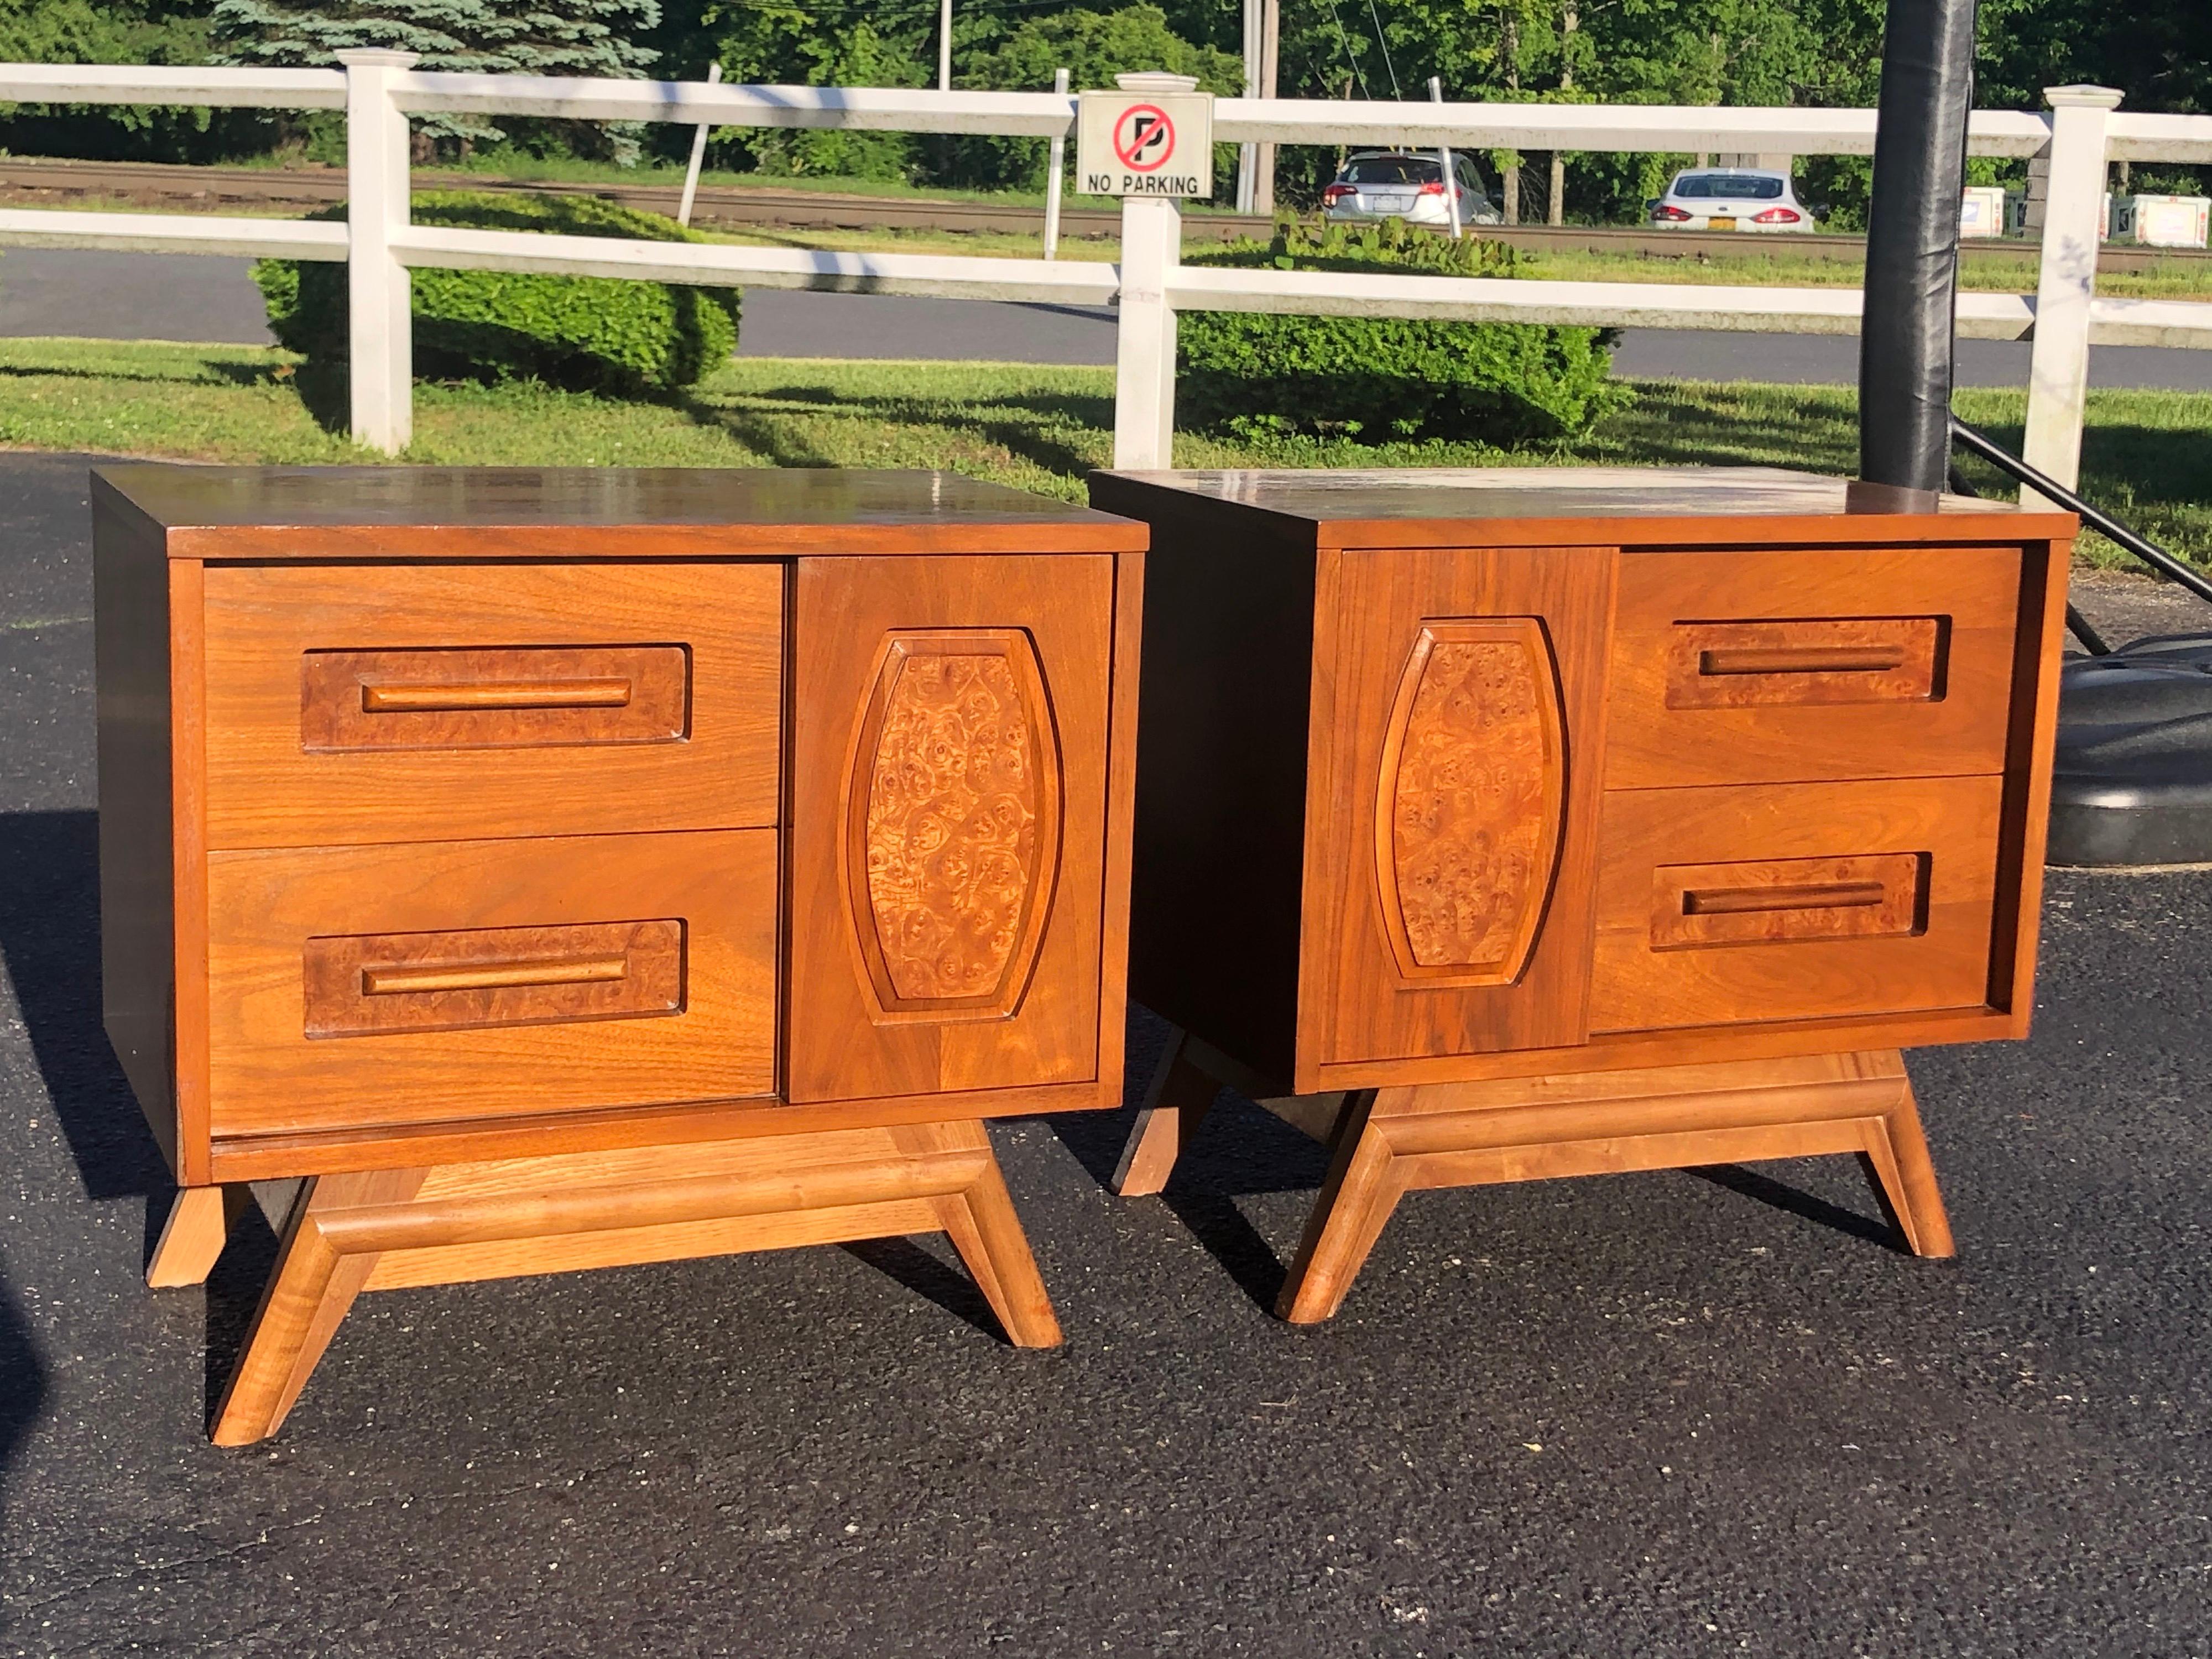 Pair of Mid-Century Modern walnut nightstands. Tiki style frontal design with one panel having burl wood inlay. Two drawers on one side and then a sliding cabinet door to reveal inside storage. Solid and well built. Perfect for that midcentury home